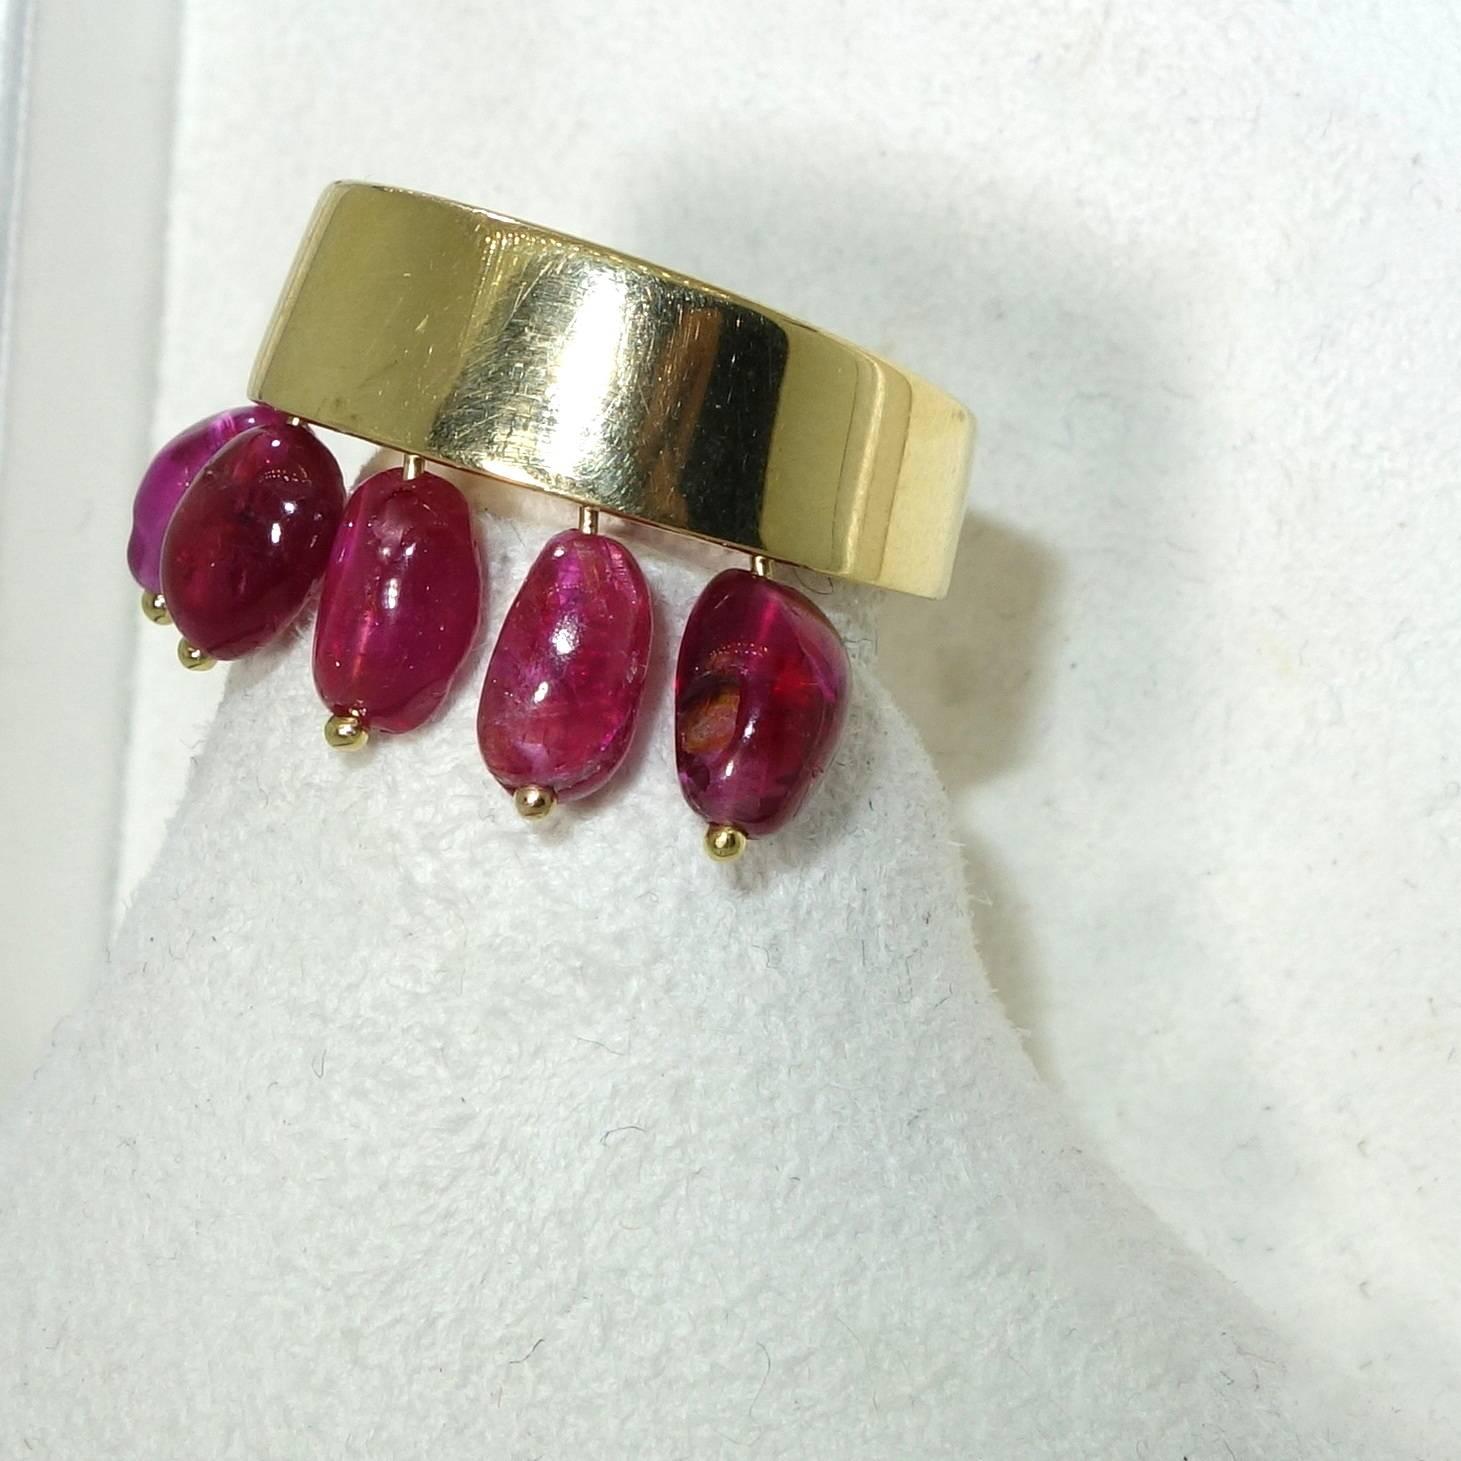 This unusual ring has five drop natural bright rubies suspended from the 18K ring.  There are approximately 4 cts. of rubies.  The ring is a size 6 and can be sized.   On the interior of the shank the ring is stamped 750 with other marks from the